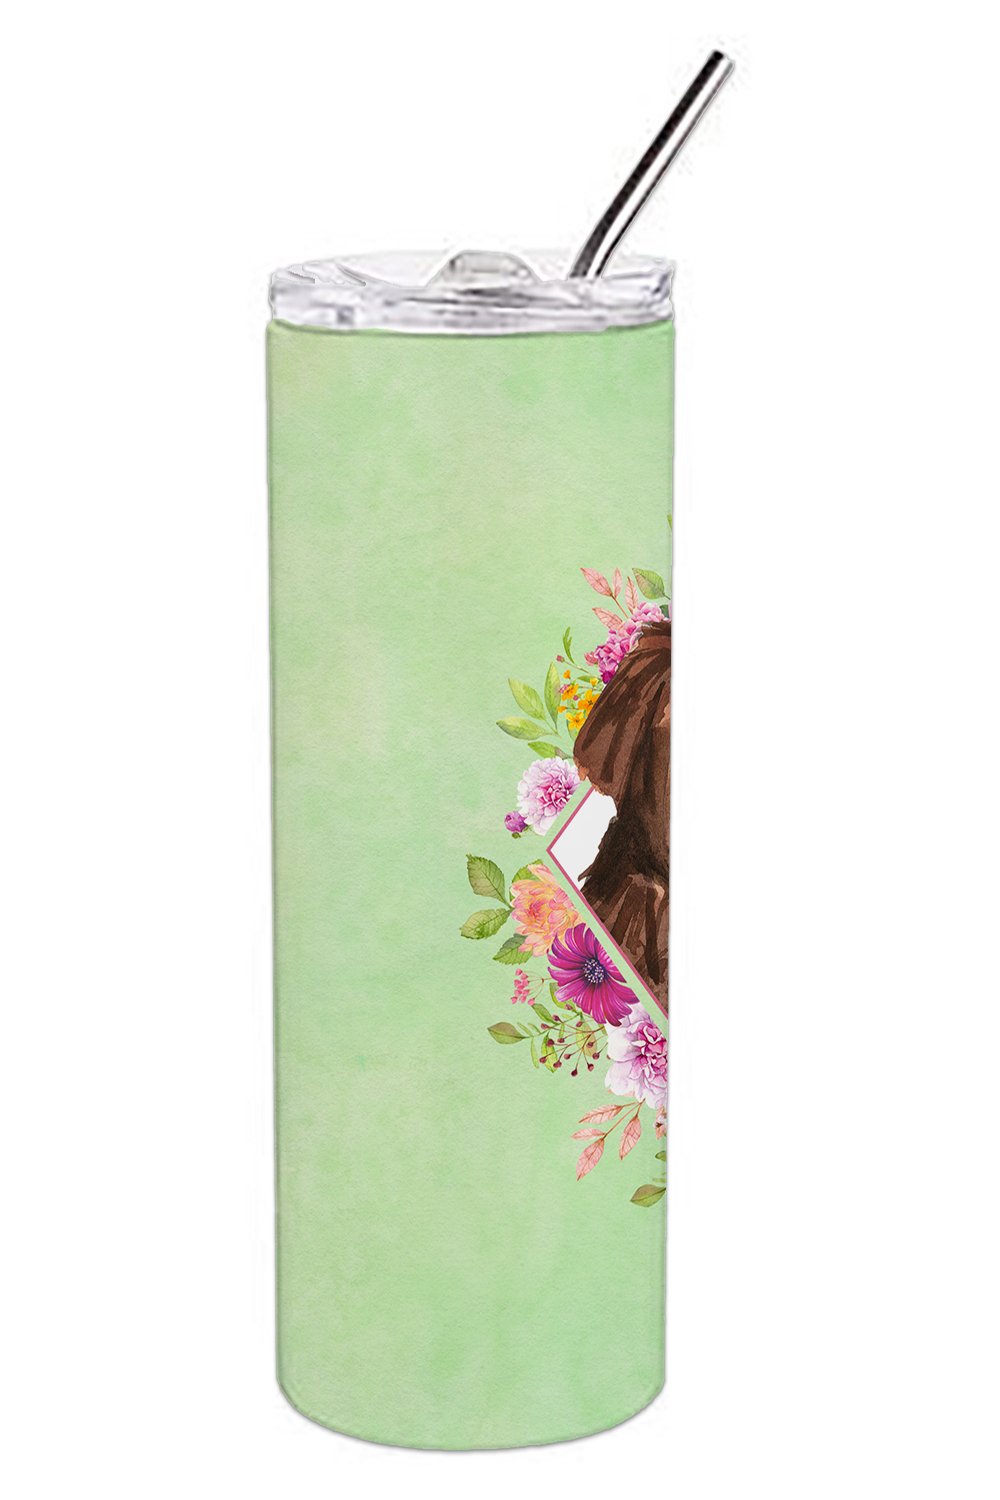 Newfoundland Green Flowers Double Walled Stainless Steel 20 oz Skinny Tumbler CK4381TBL20 by Caroline's Treasures